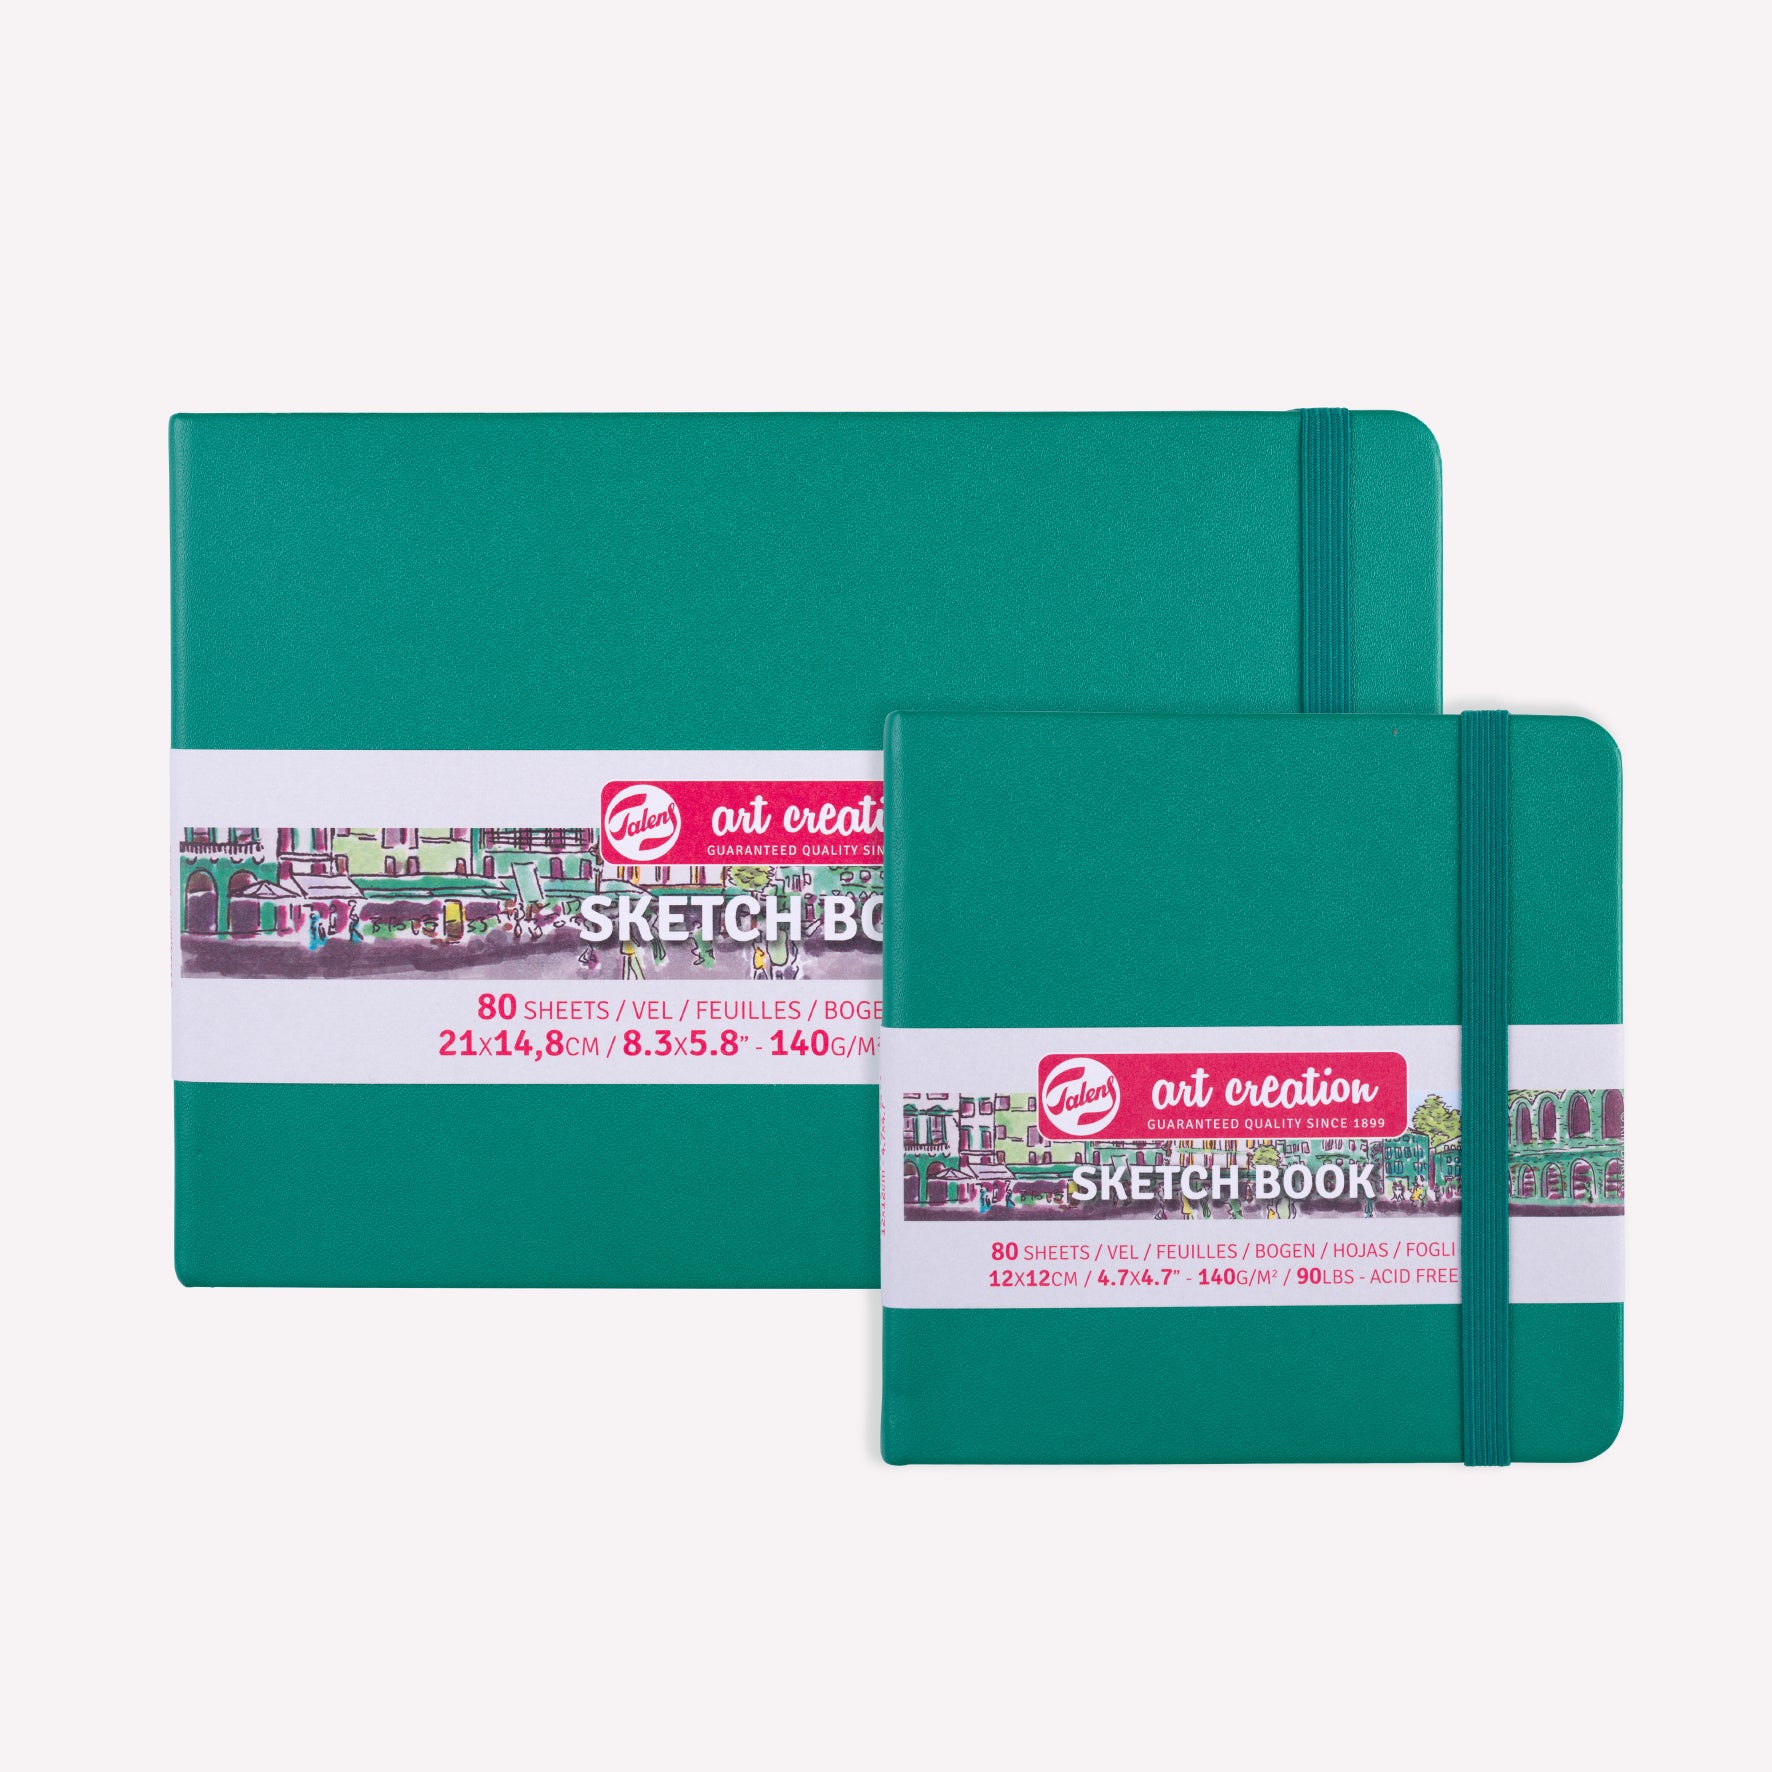 Royal Talens Art Creation Sketchbooks with a sturdy Forest Green imitation-leather cover, available in 21x14.8cm and 12x12cm.